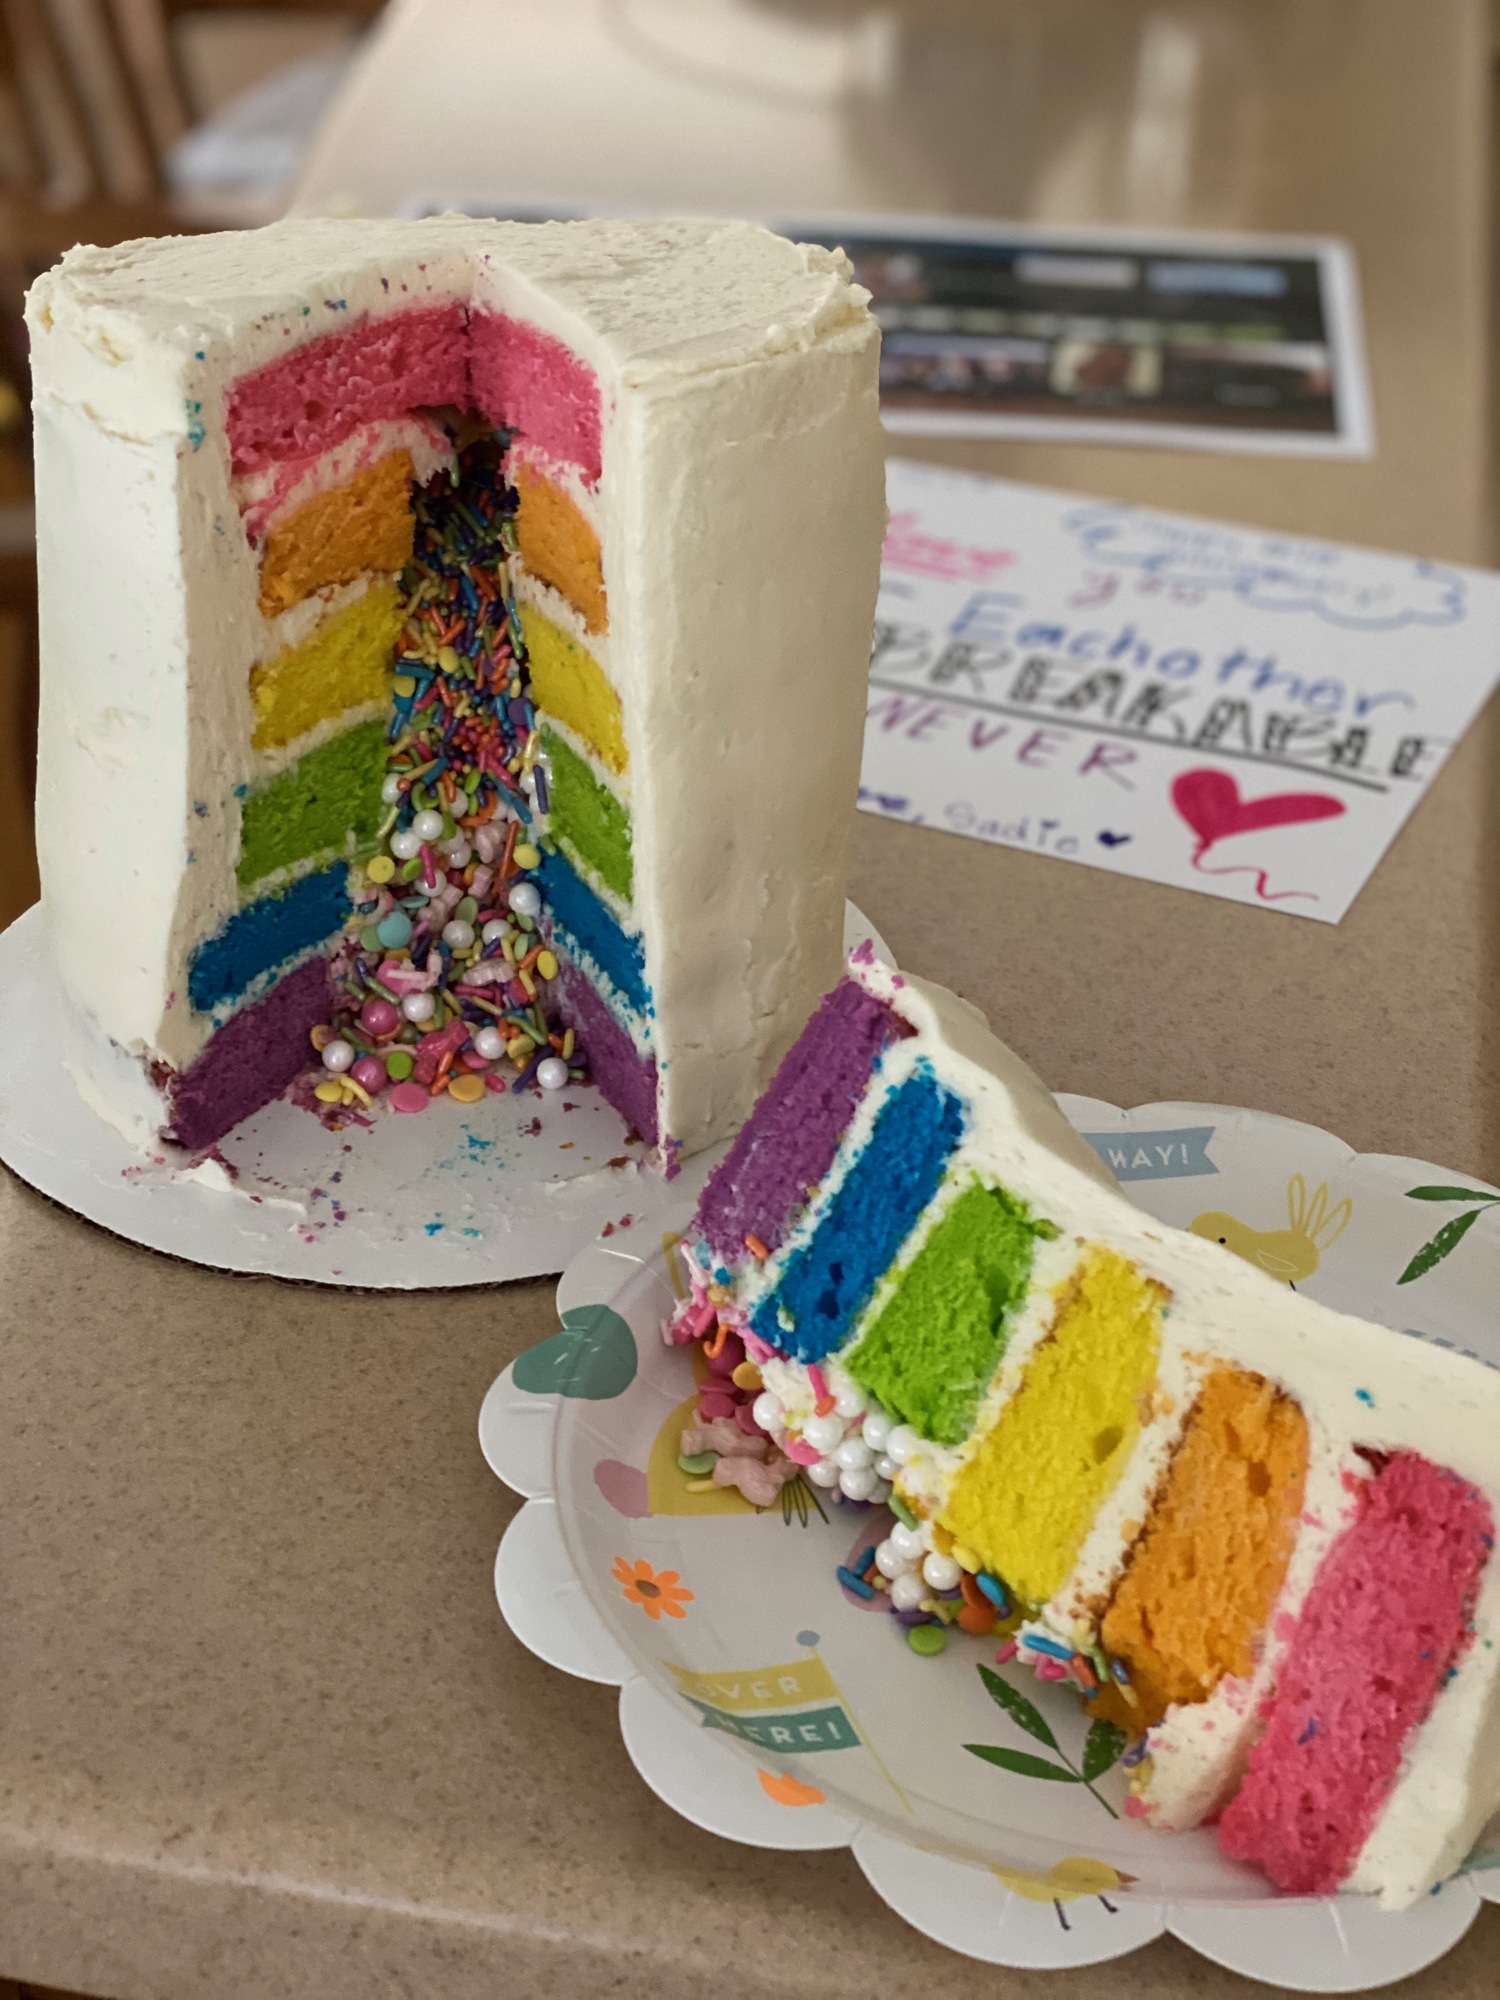 Valerie Demino delivers a rainbow cake she made from scratch. Courtesy photo.